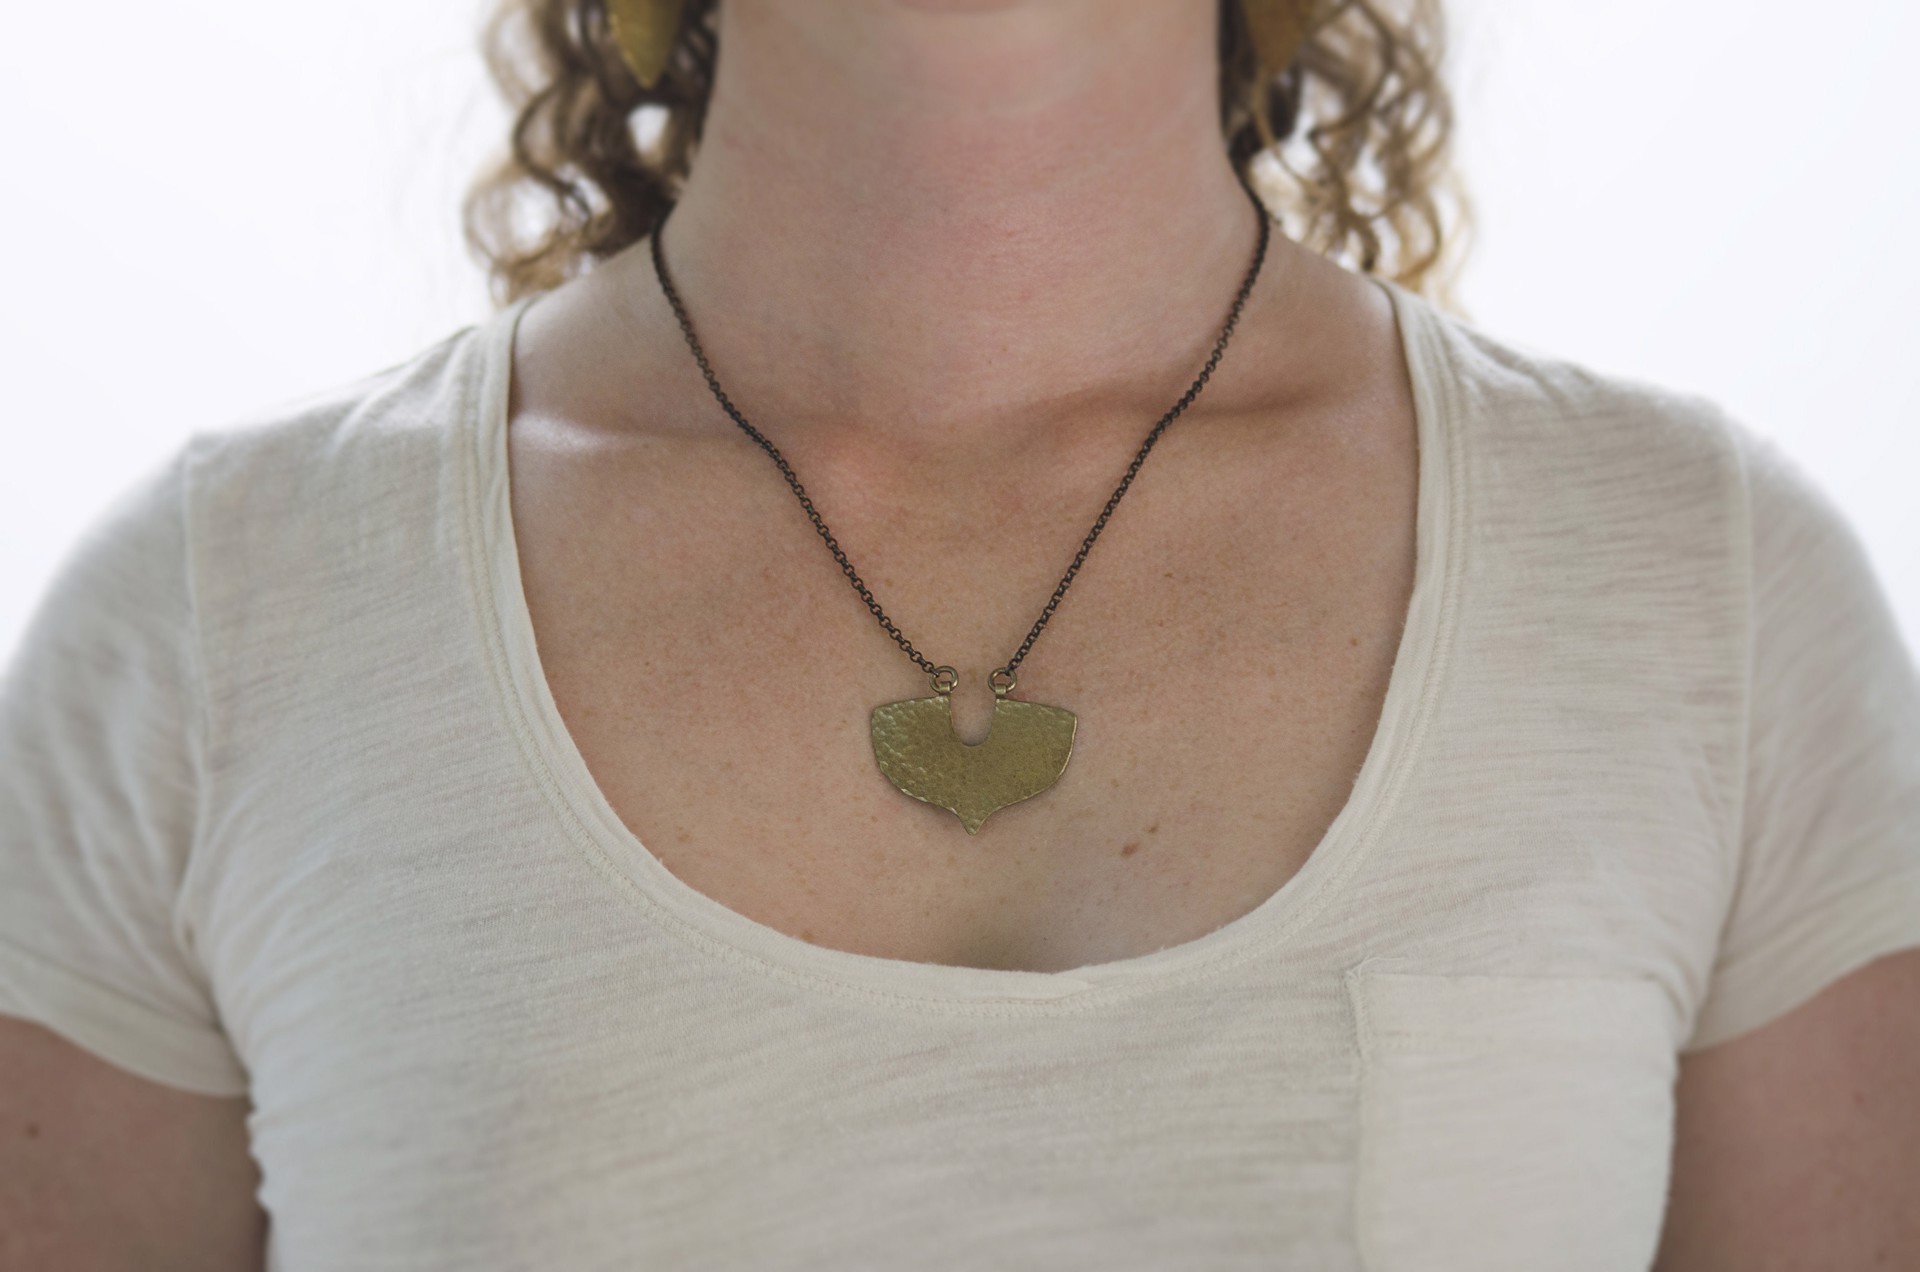 Shield Necklace in Blackened Copper by Clementine & Co. Jewelry